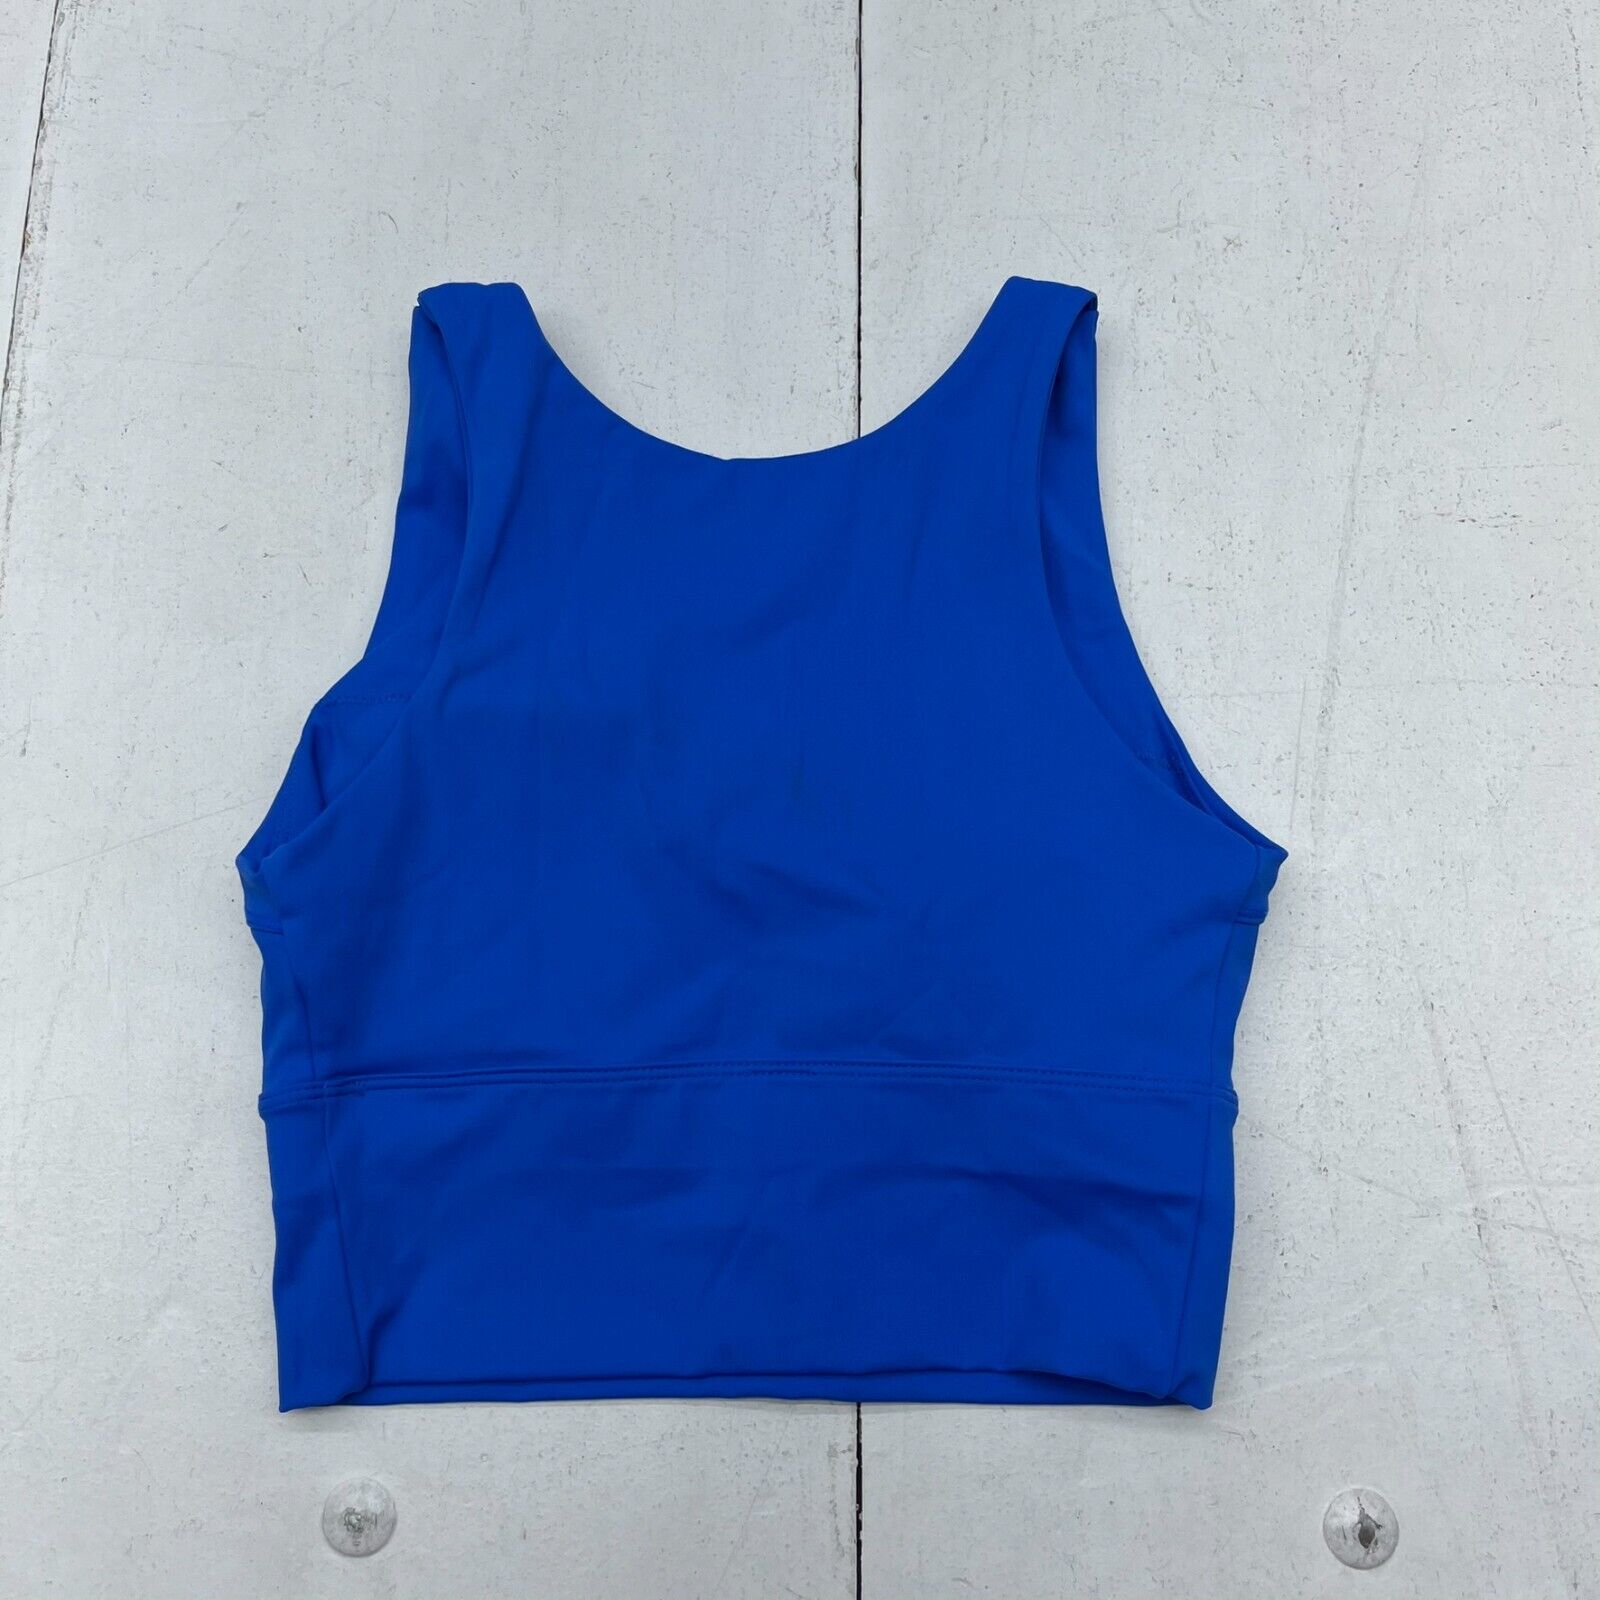 Blue Built-In Bra Cropped Tank Top Women's Size Small NEW - beyond